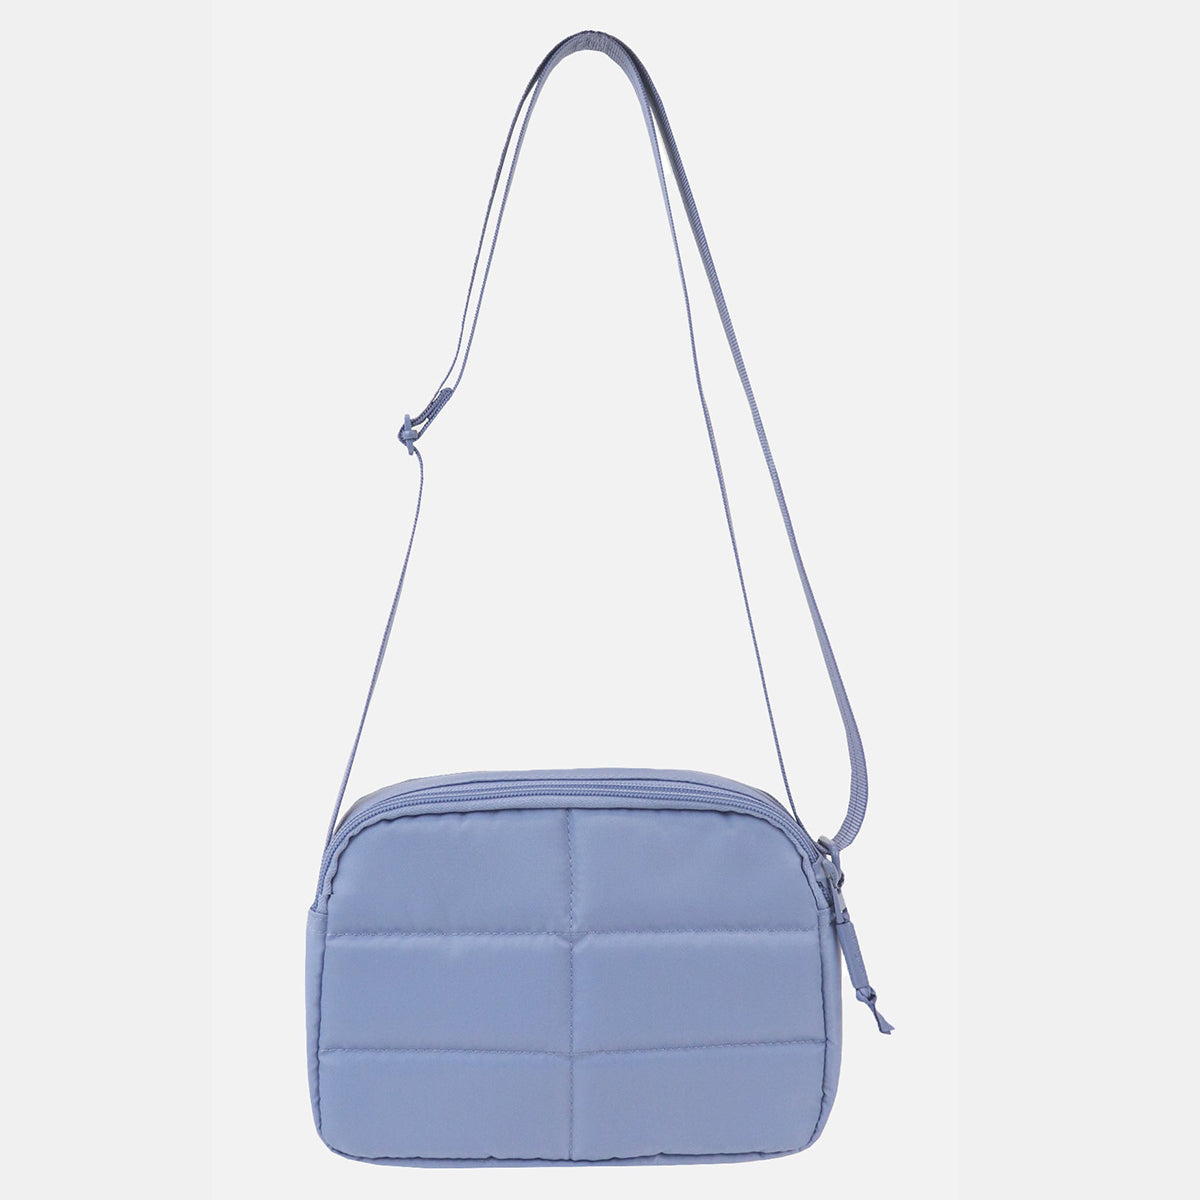 Hedgren Stowe Taos Sustainably Made Crossbody Bag